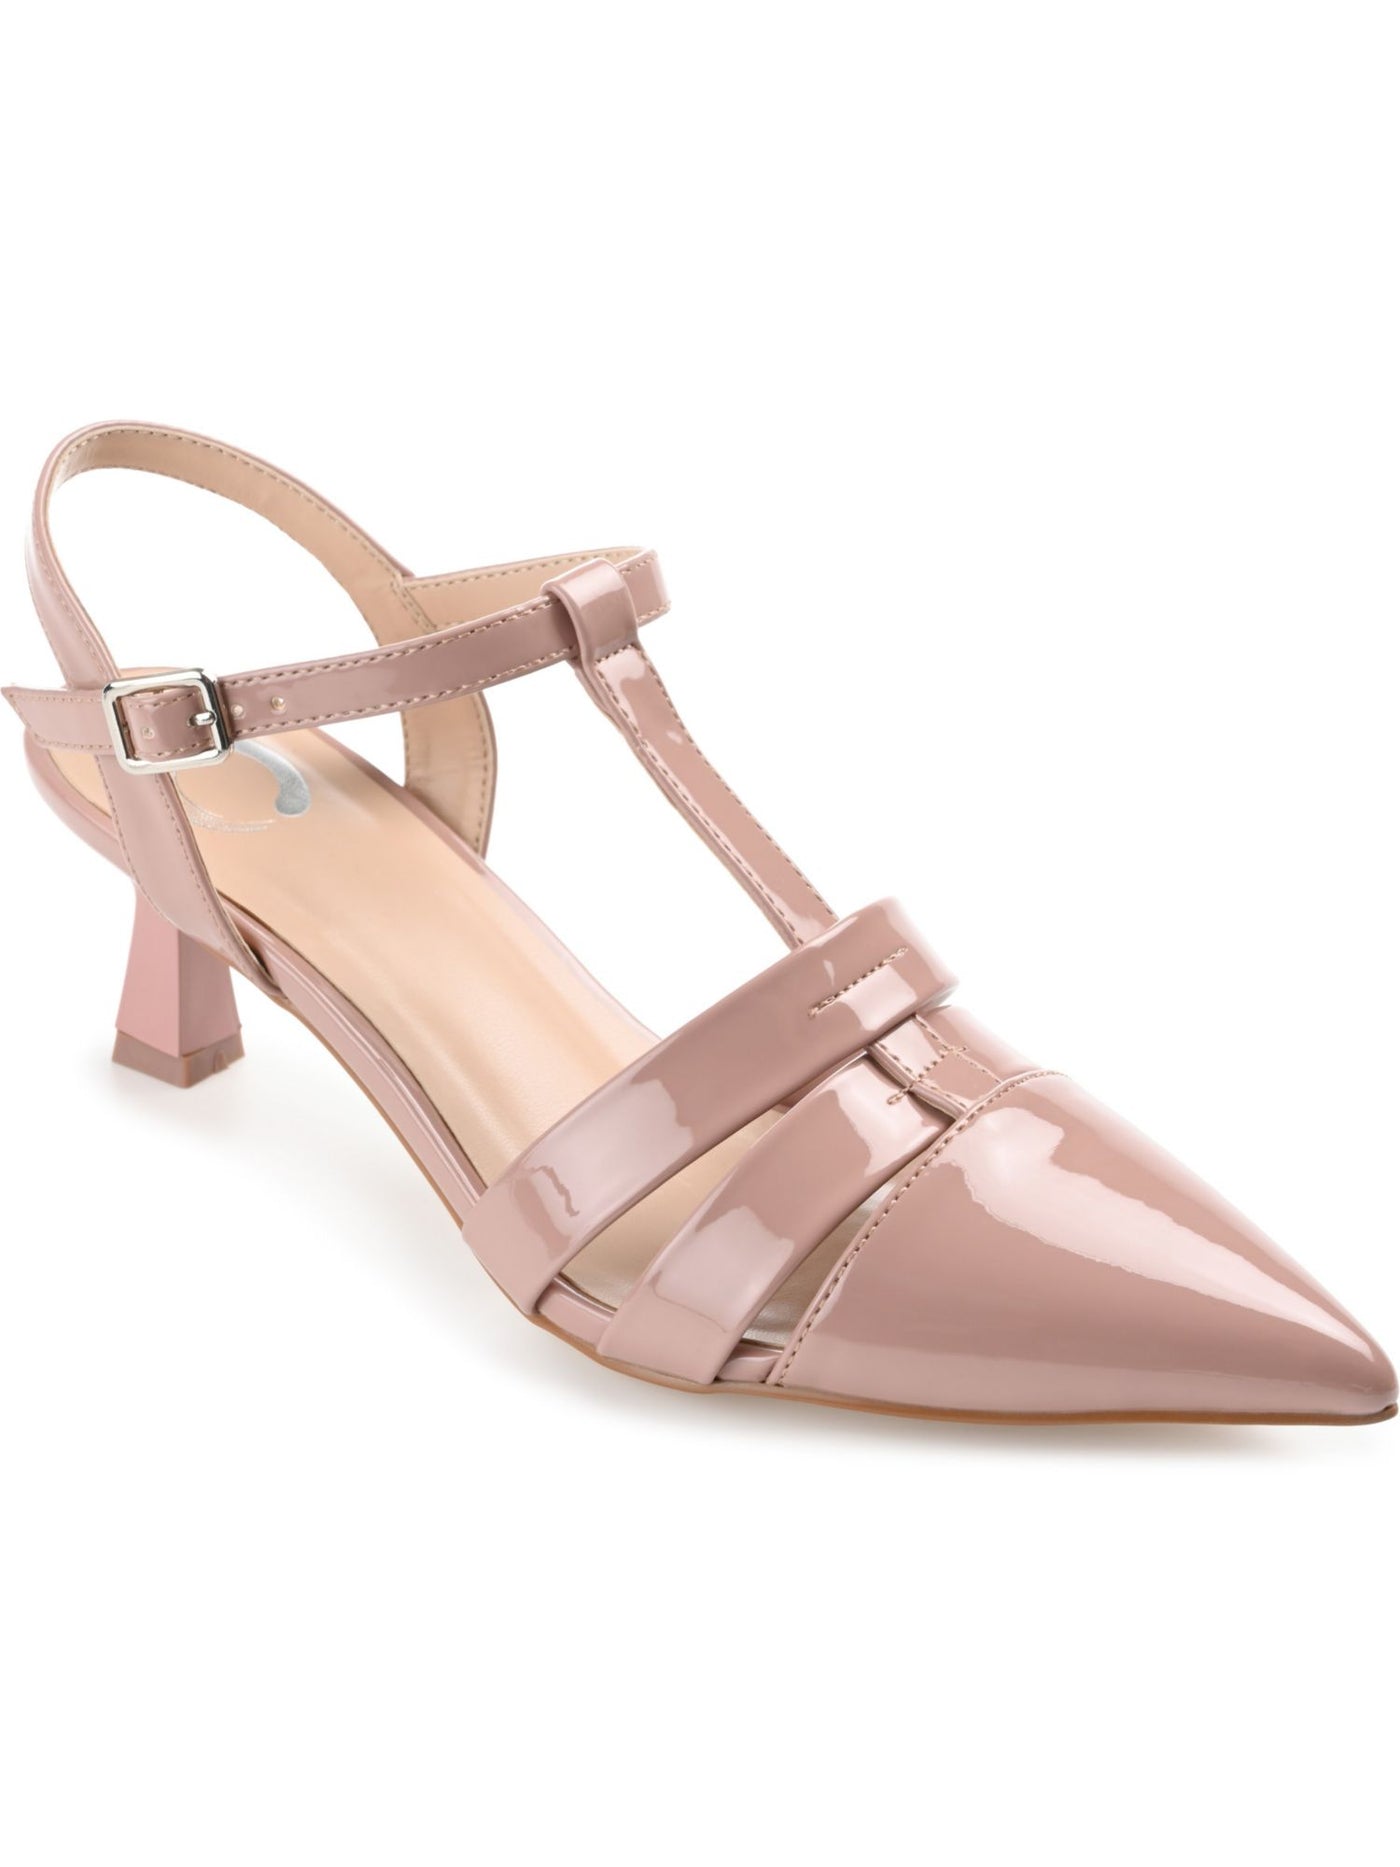 JOURNEE COLLECTION Womens Pink T-Strap Padded Jazlynn Pointed Toe Kitten Heel Buckle Pumps Shoes 8.5